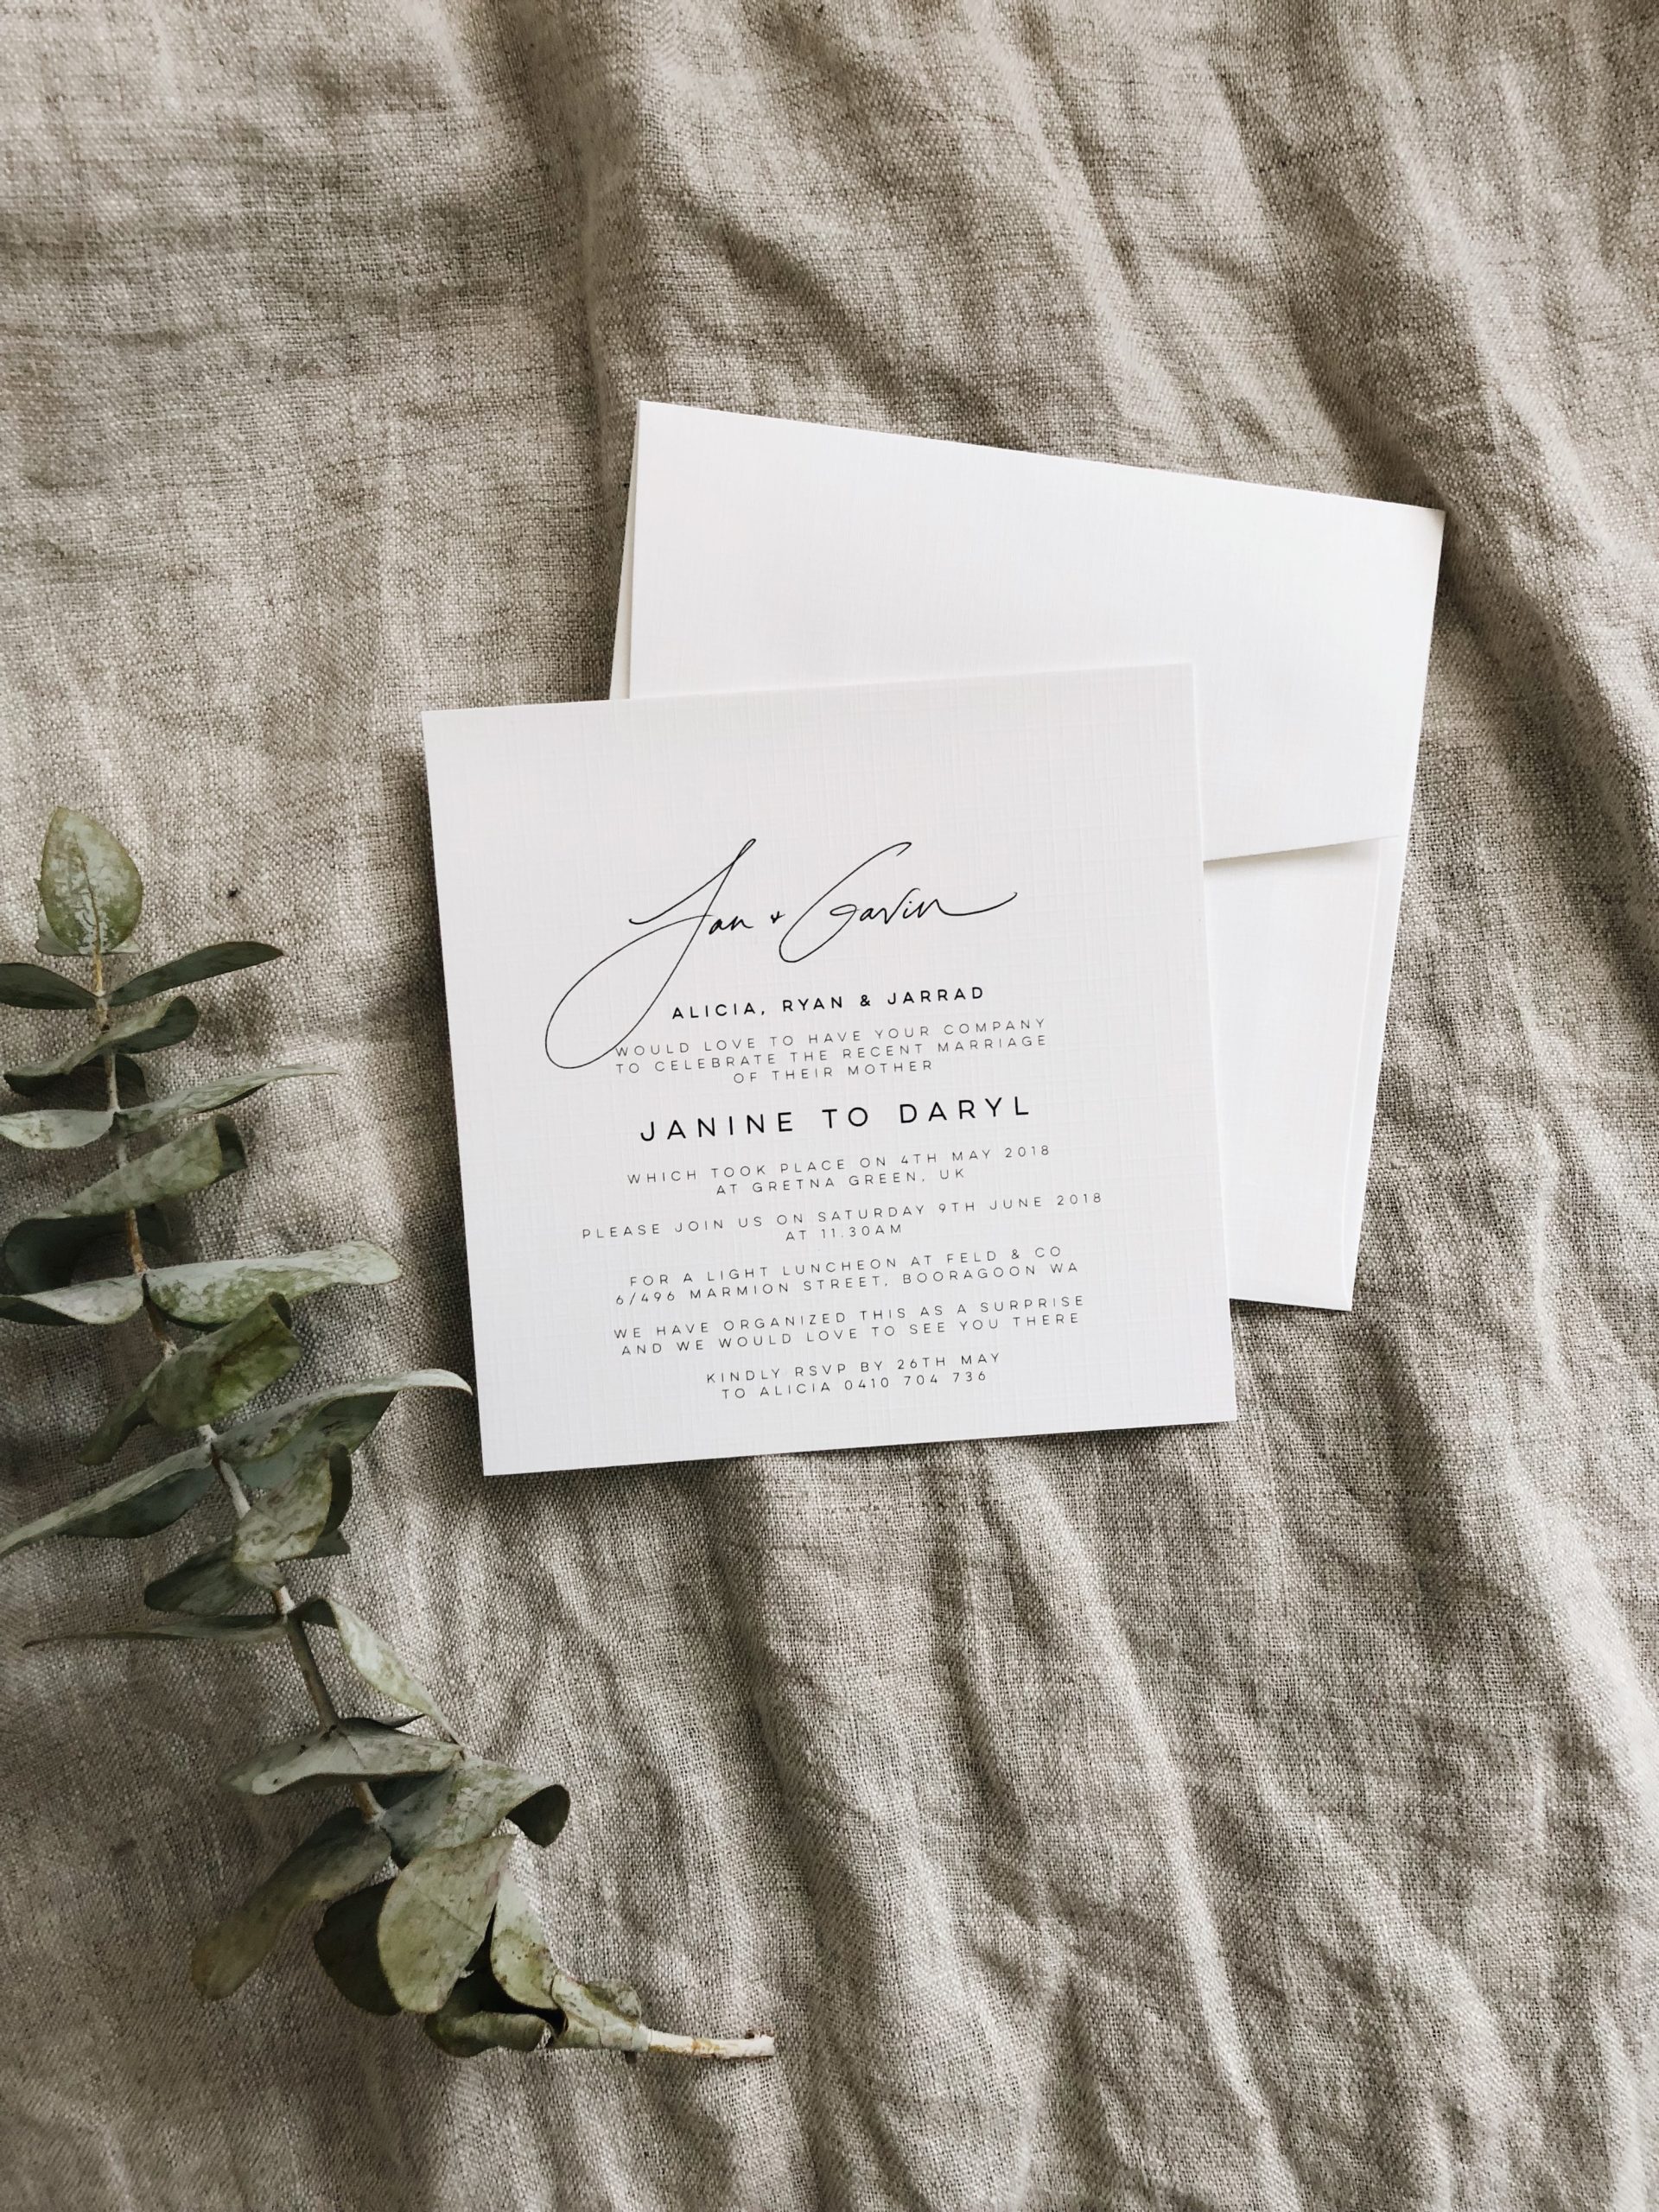 perth wedding and bride expo stationery